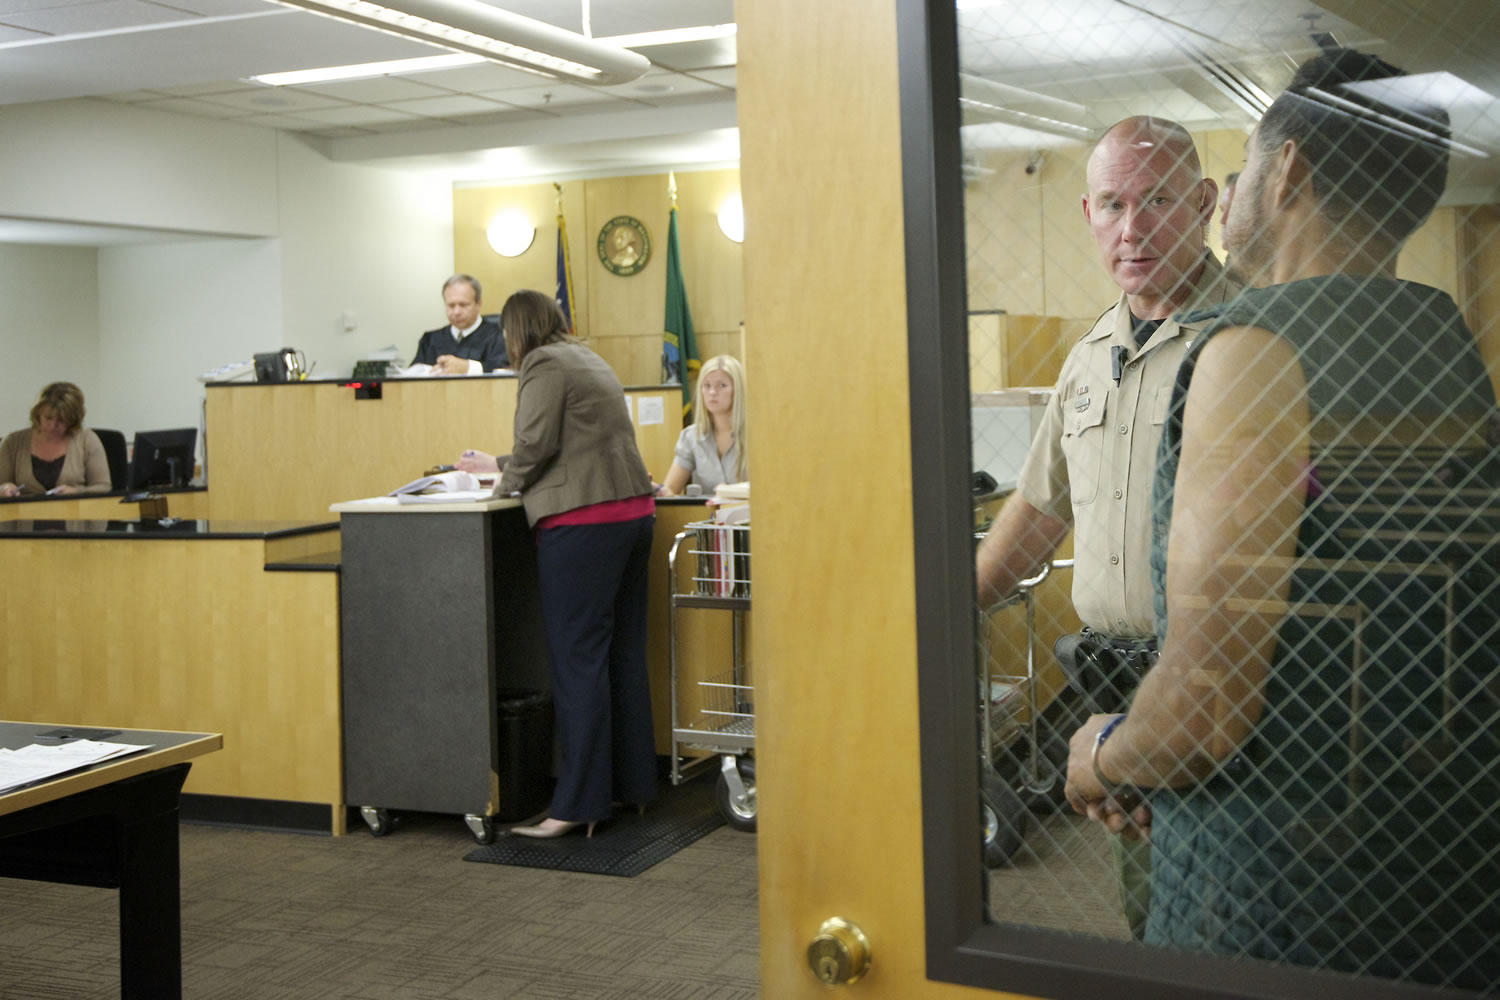 Clark County sheriff's custody officer Vaughn Gano calls an inmate from a secure area during a Superior Court session on Monday at the Clark County Courthouse.